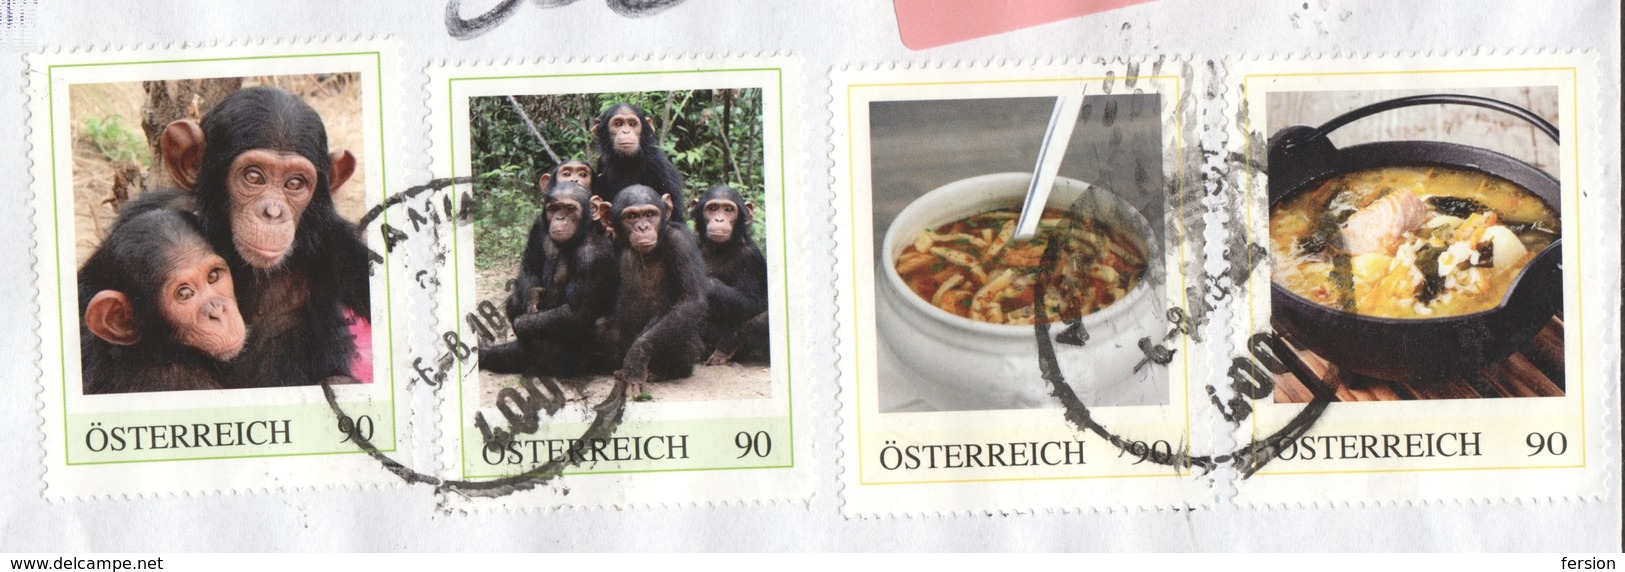 Monkey Chimpanzee / Austria St. Martin - Personal Stamp / Food Soup / Registered Priority Label Vignette Mail Cover - Chimpanzees